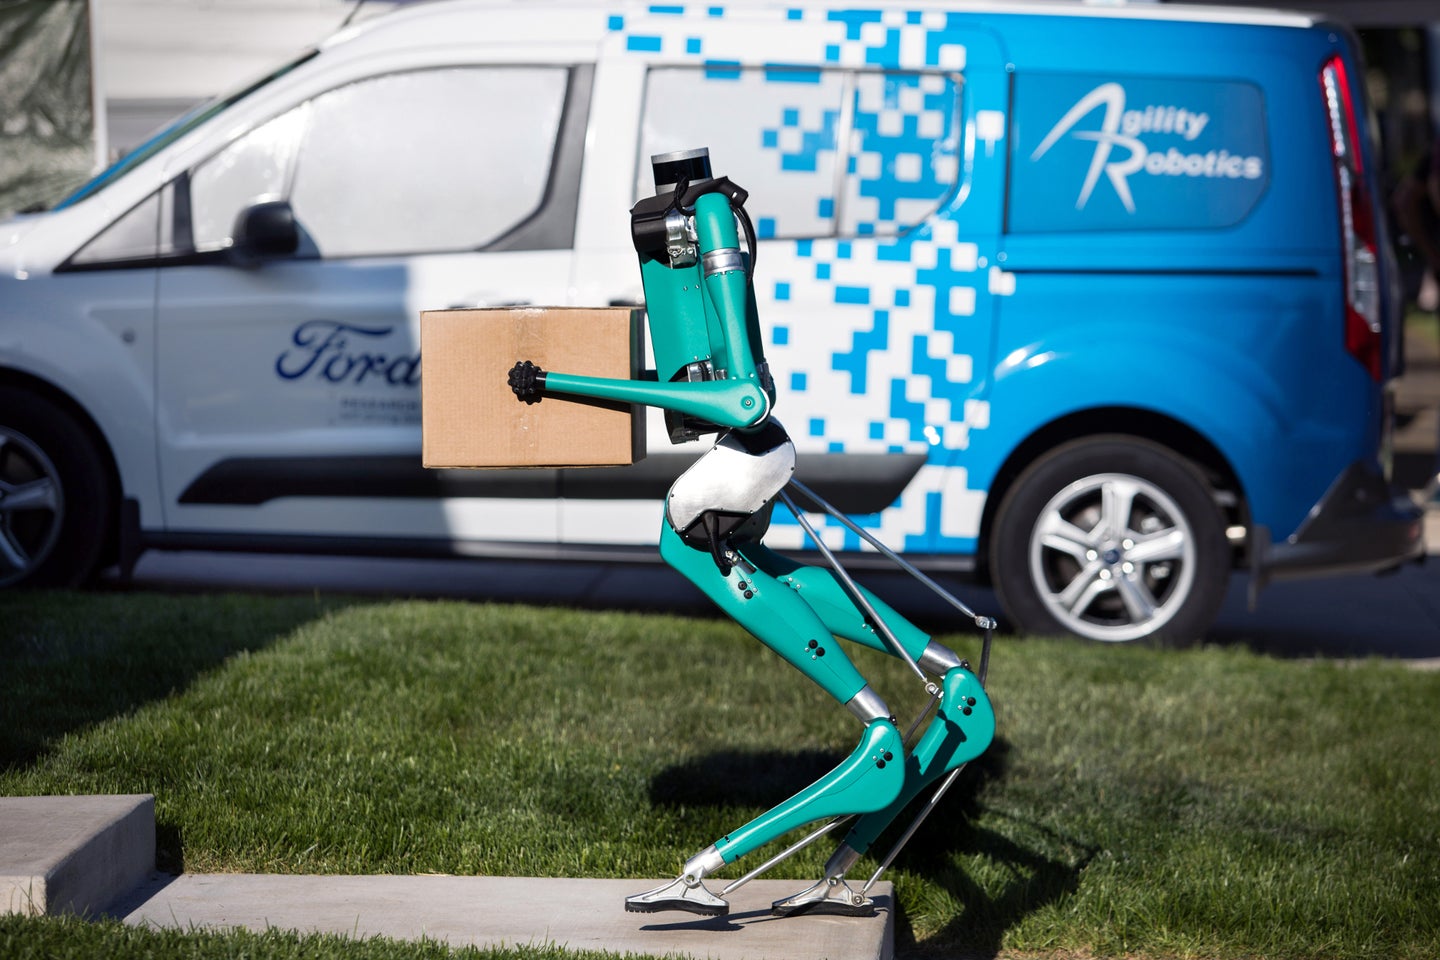 Why Ford’s Humanoid Robot Partnership Is More Than A Gimmick